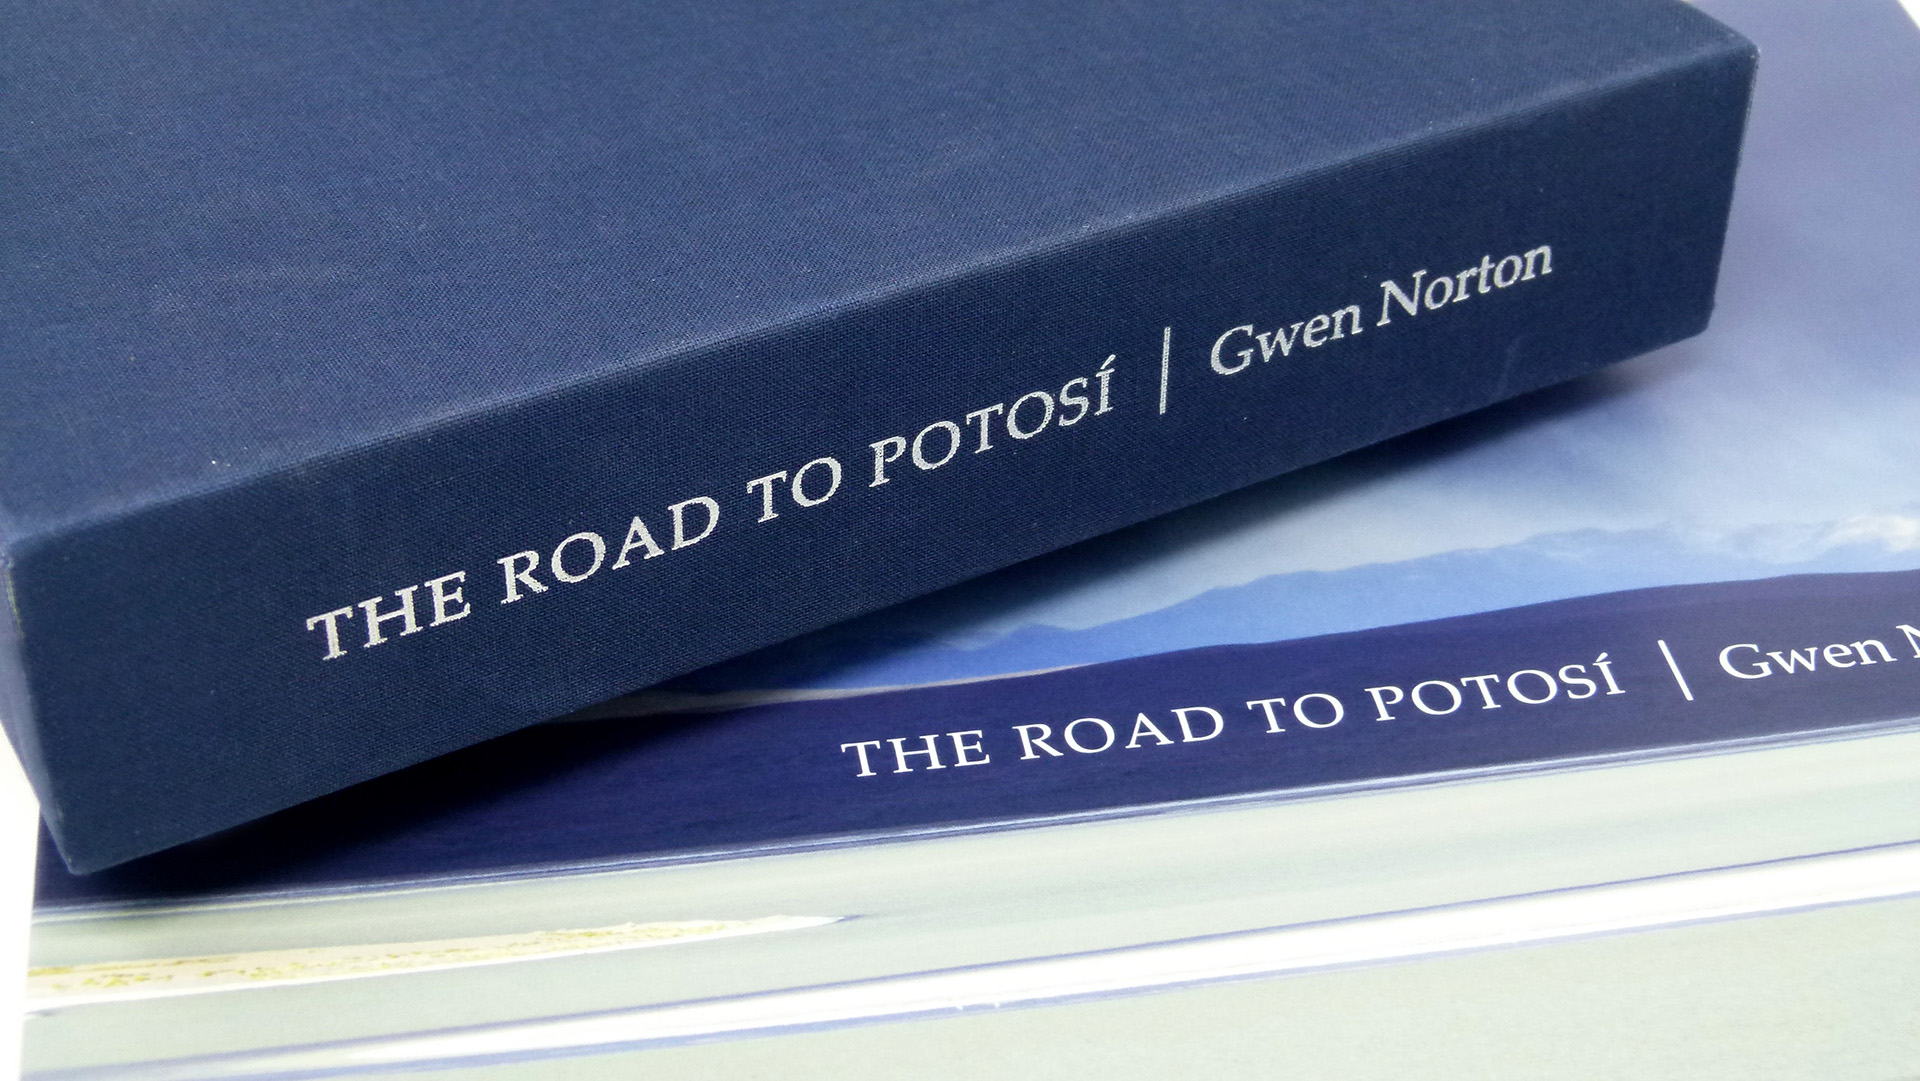 Creative Book Design: ‘The Road to Potosí’ - PaperSpecs